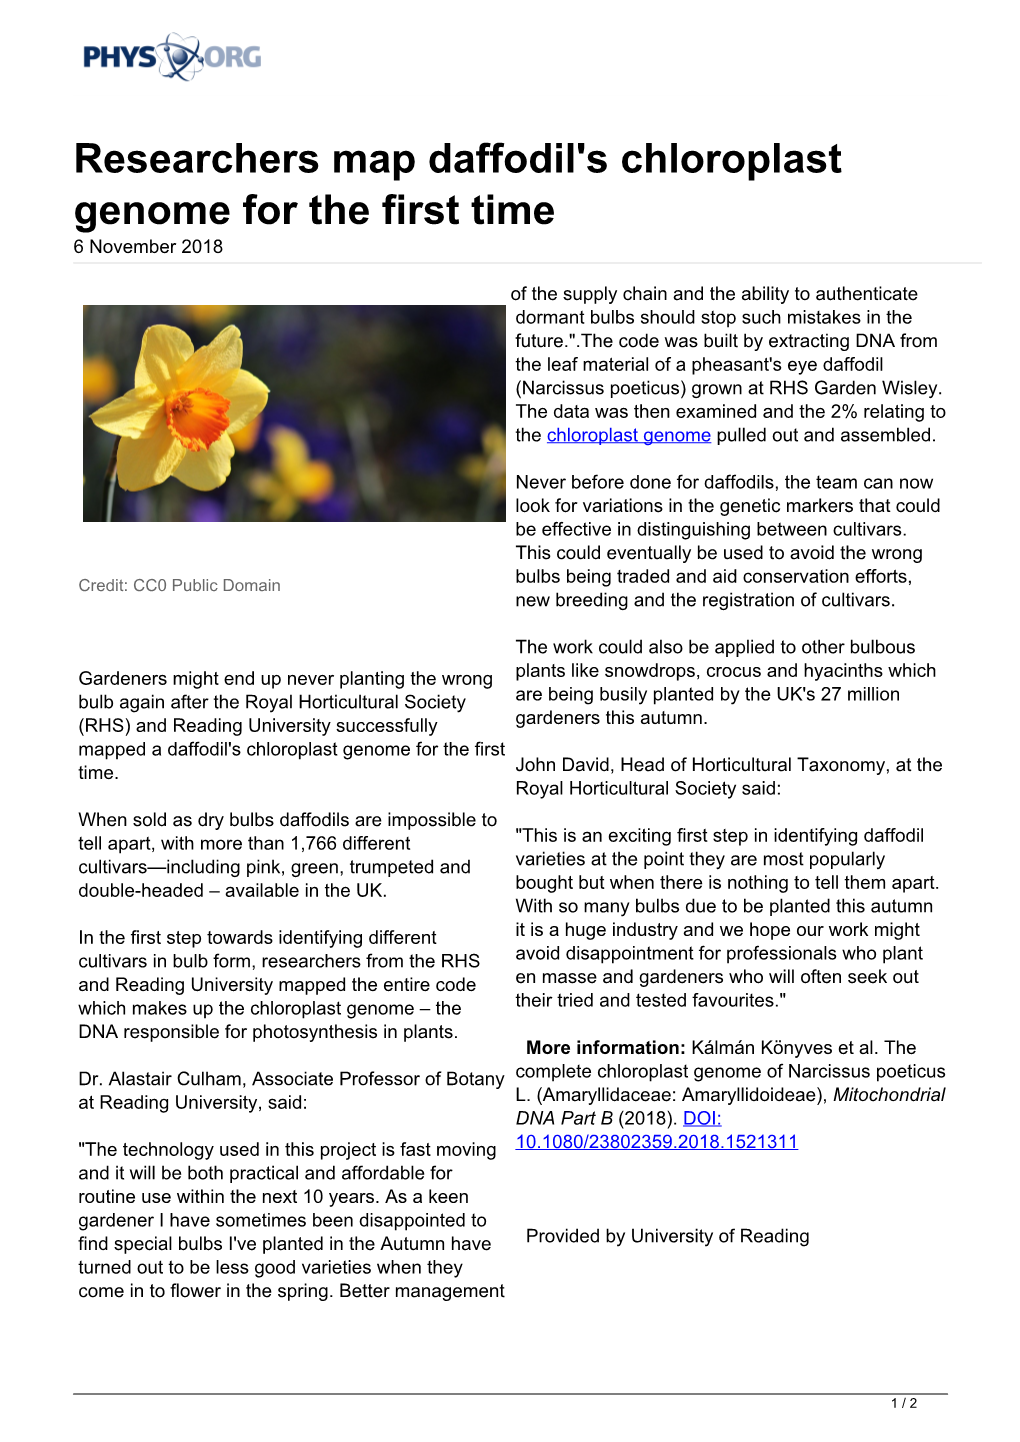 Researchers Map Daffodil's Chloroplast Genome for the First Time 6 November 2018